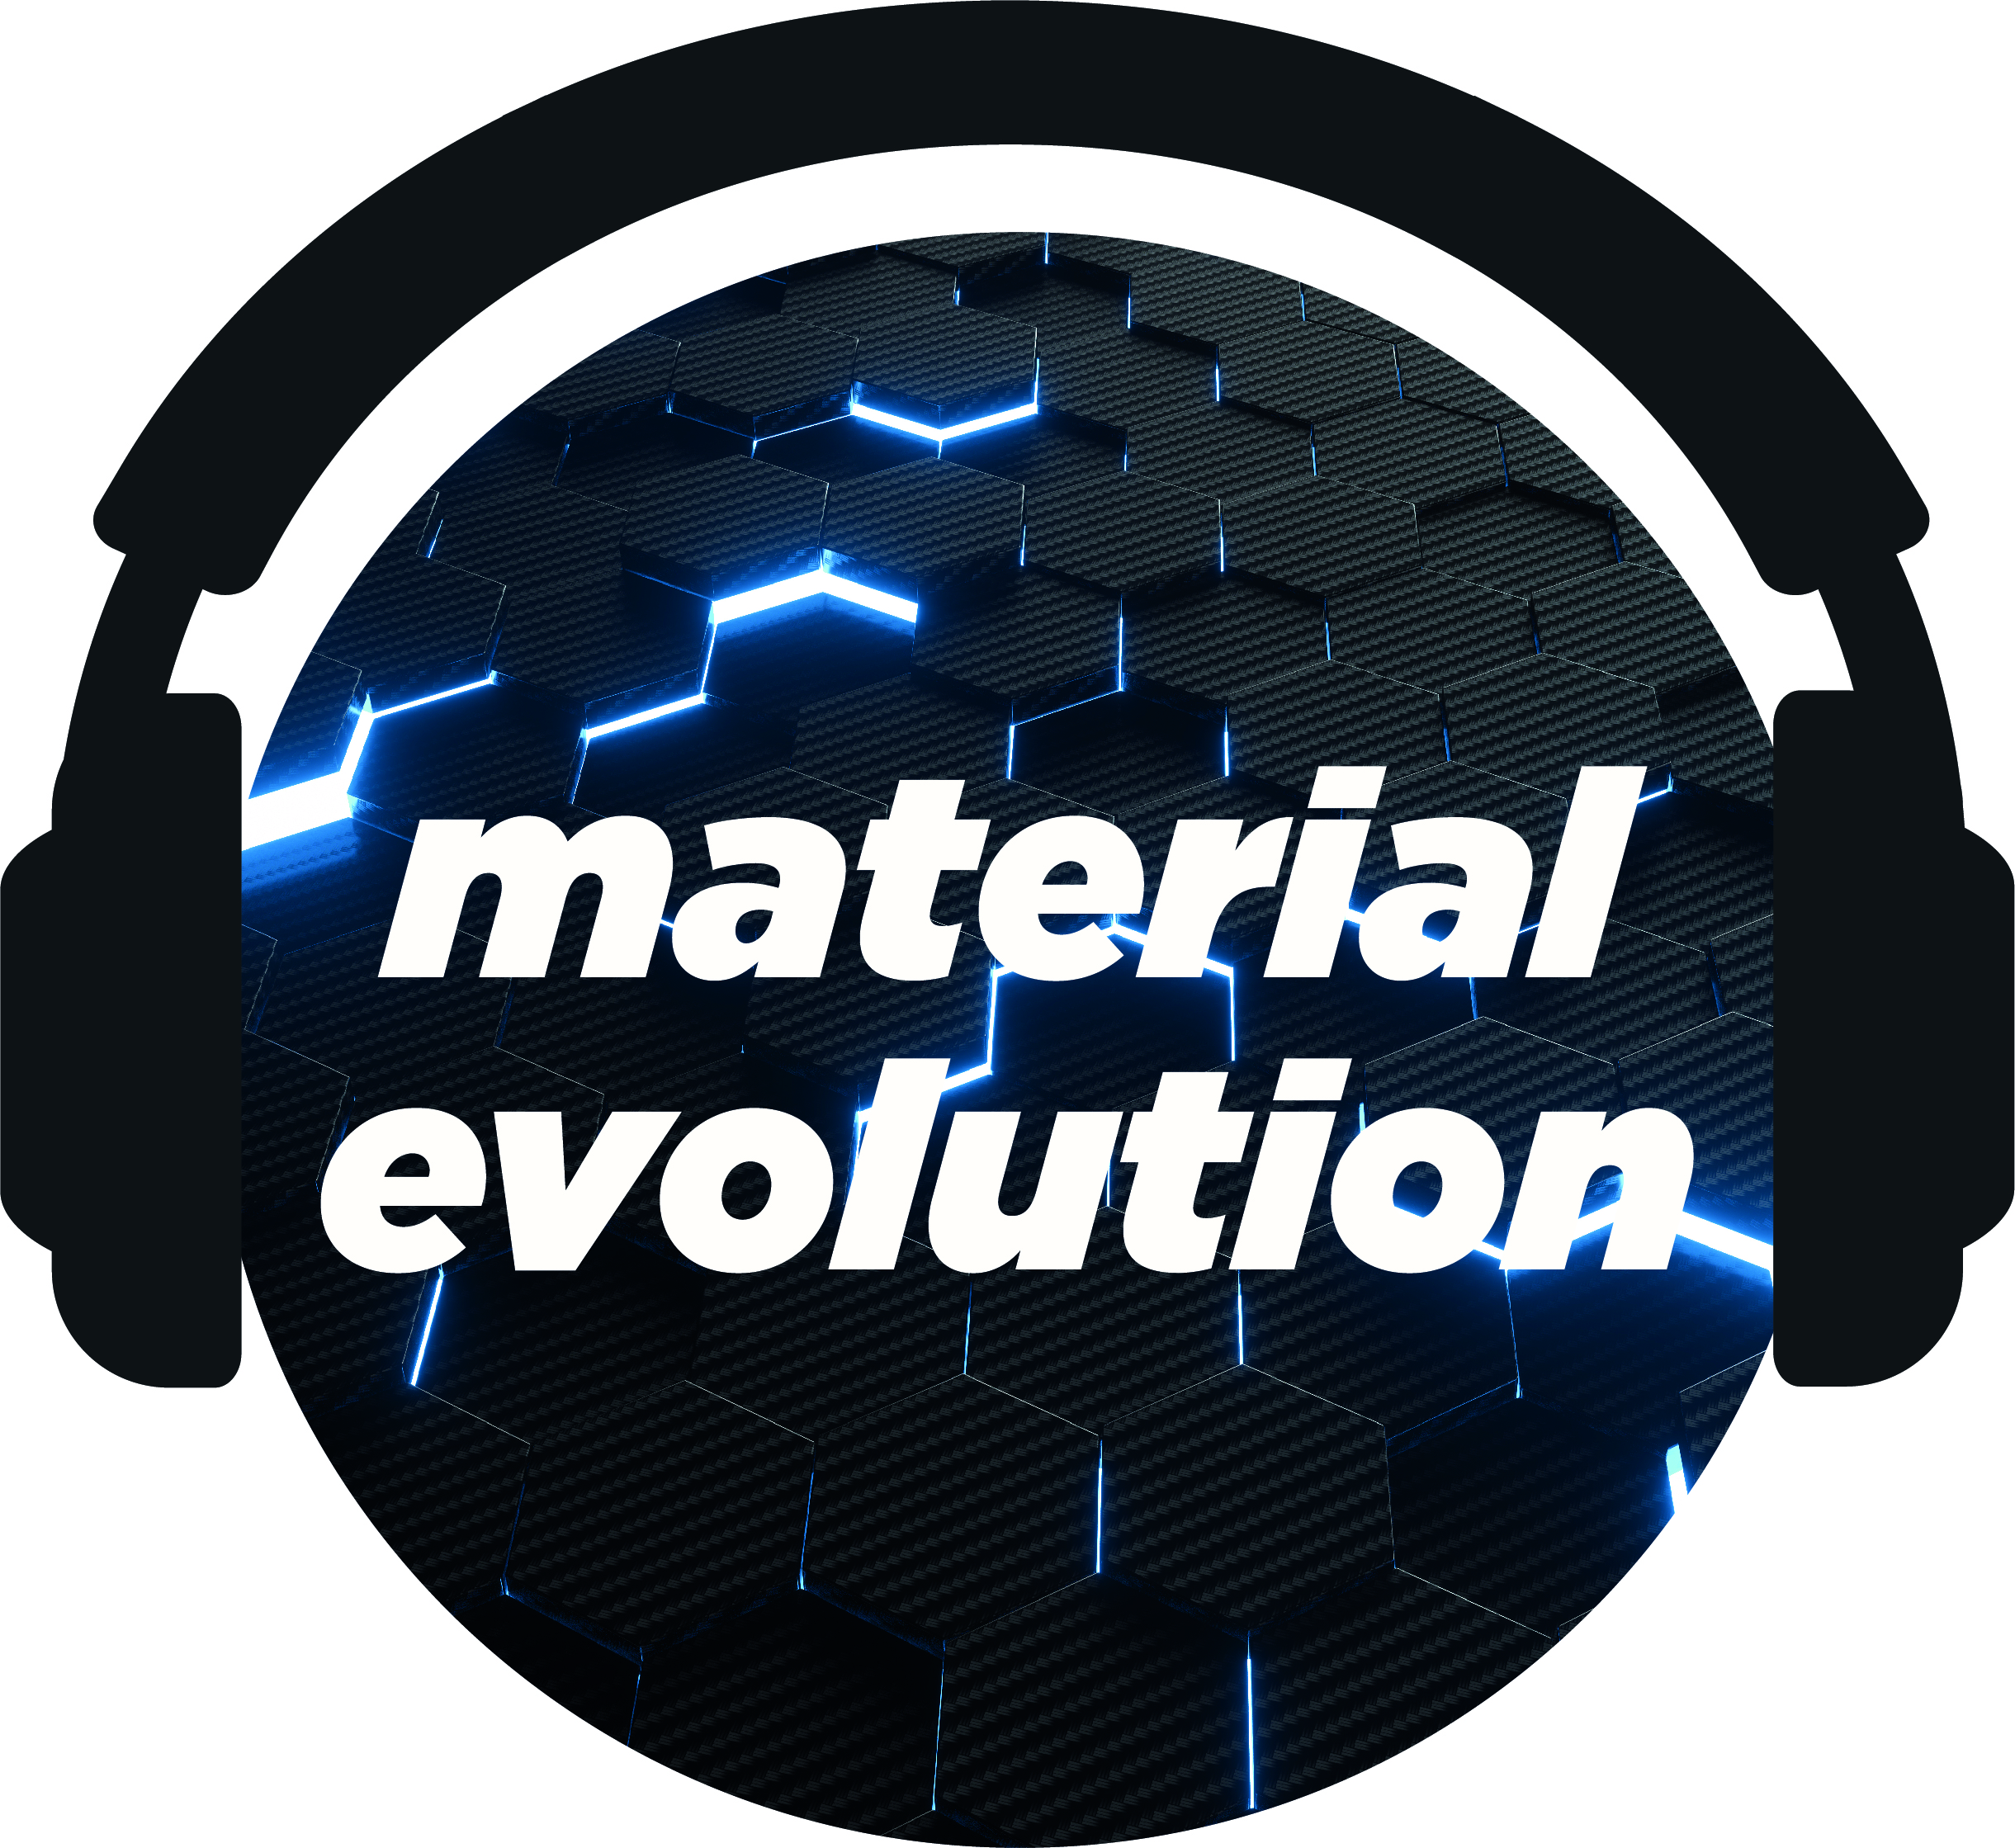 The podcast discusses the latest technologies in the composites and advanced materials industry.